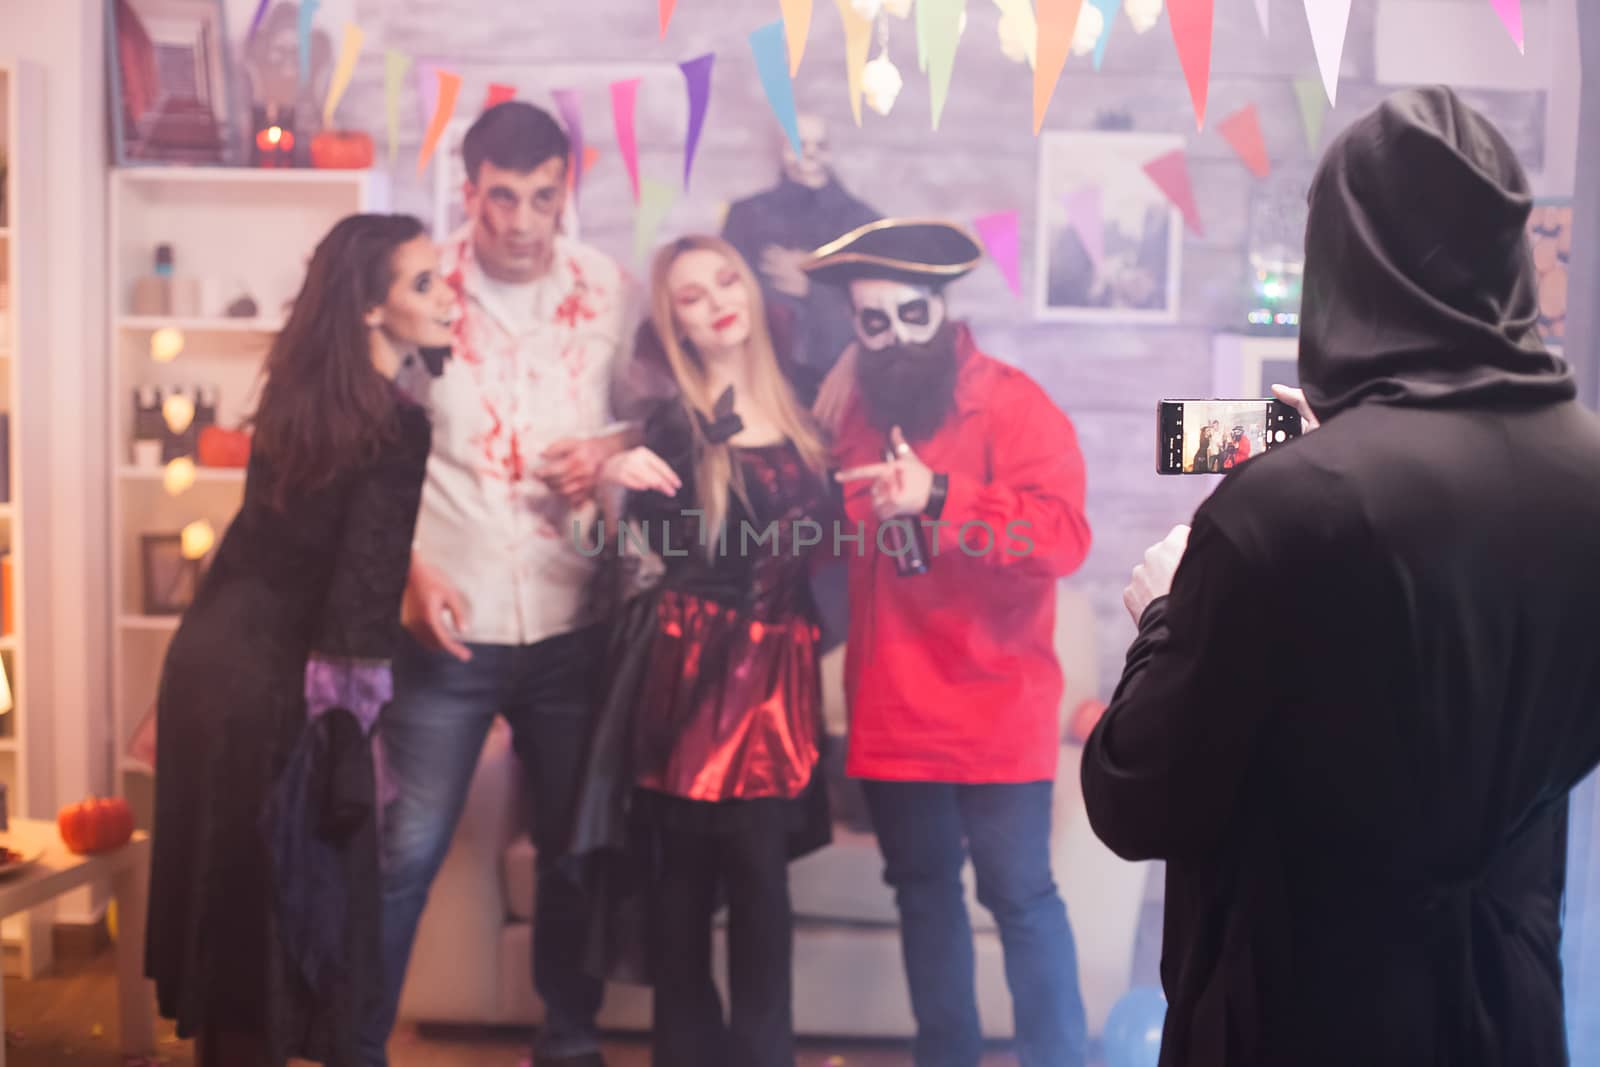 Back view of grim reaper taking a photo of friends at halloween party.